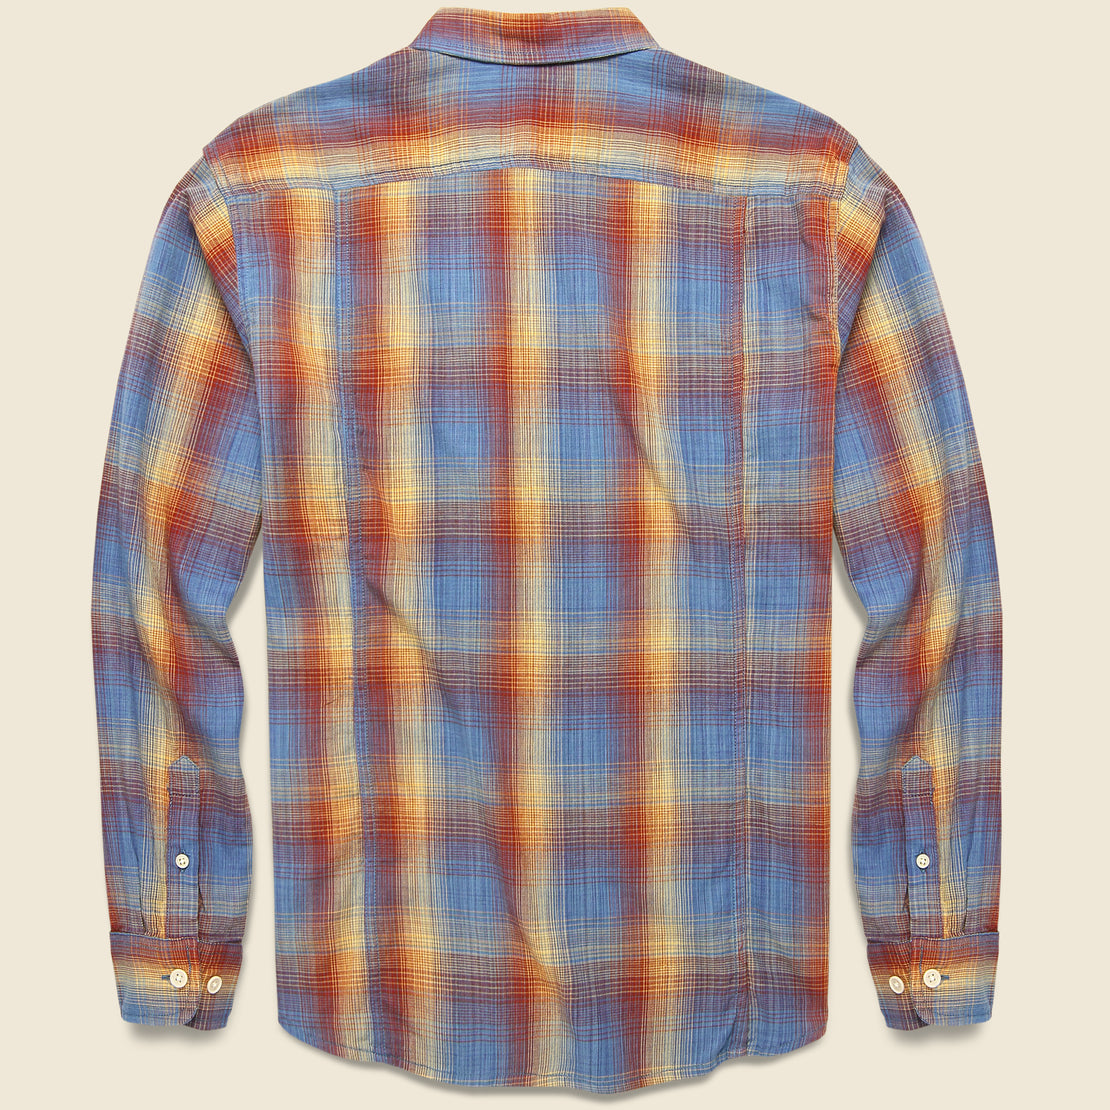 Shadow Check Shirt - Space Dye - Corridor - STAG Provisions - Tops - L/S Woven - Plaid